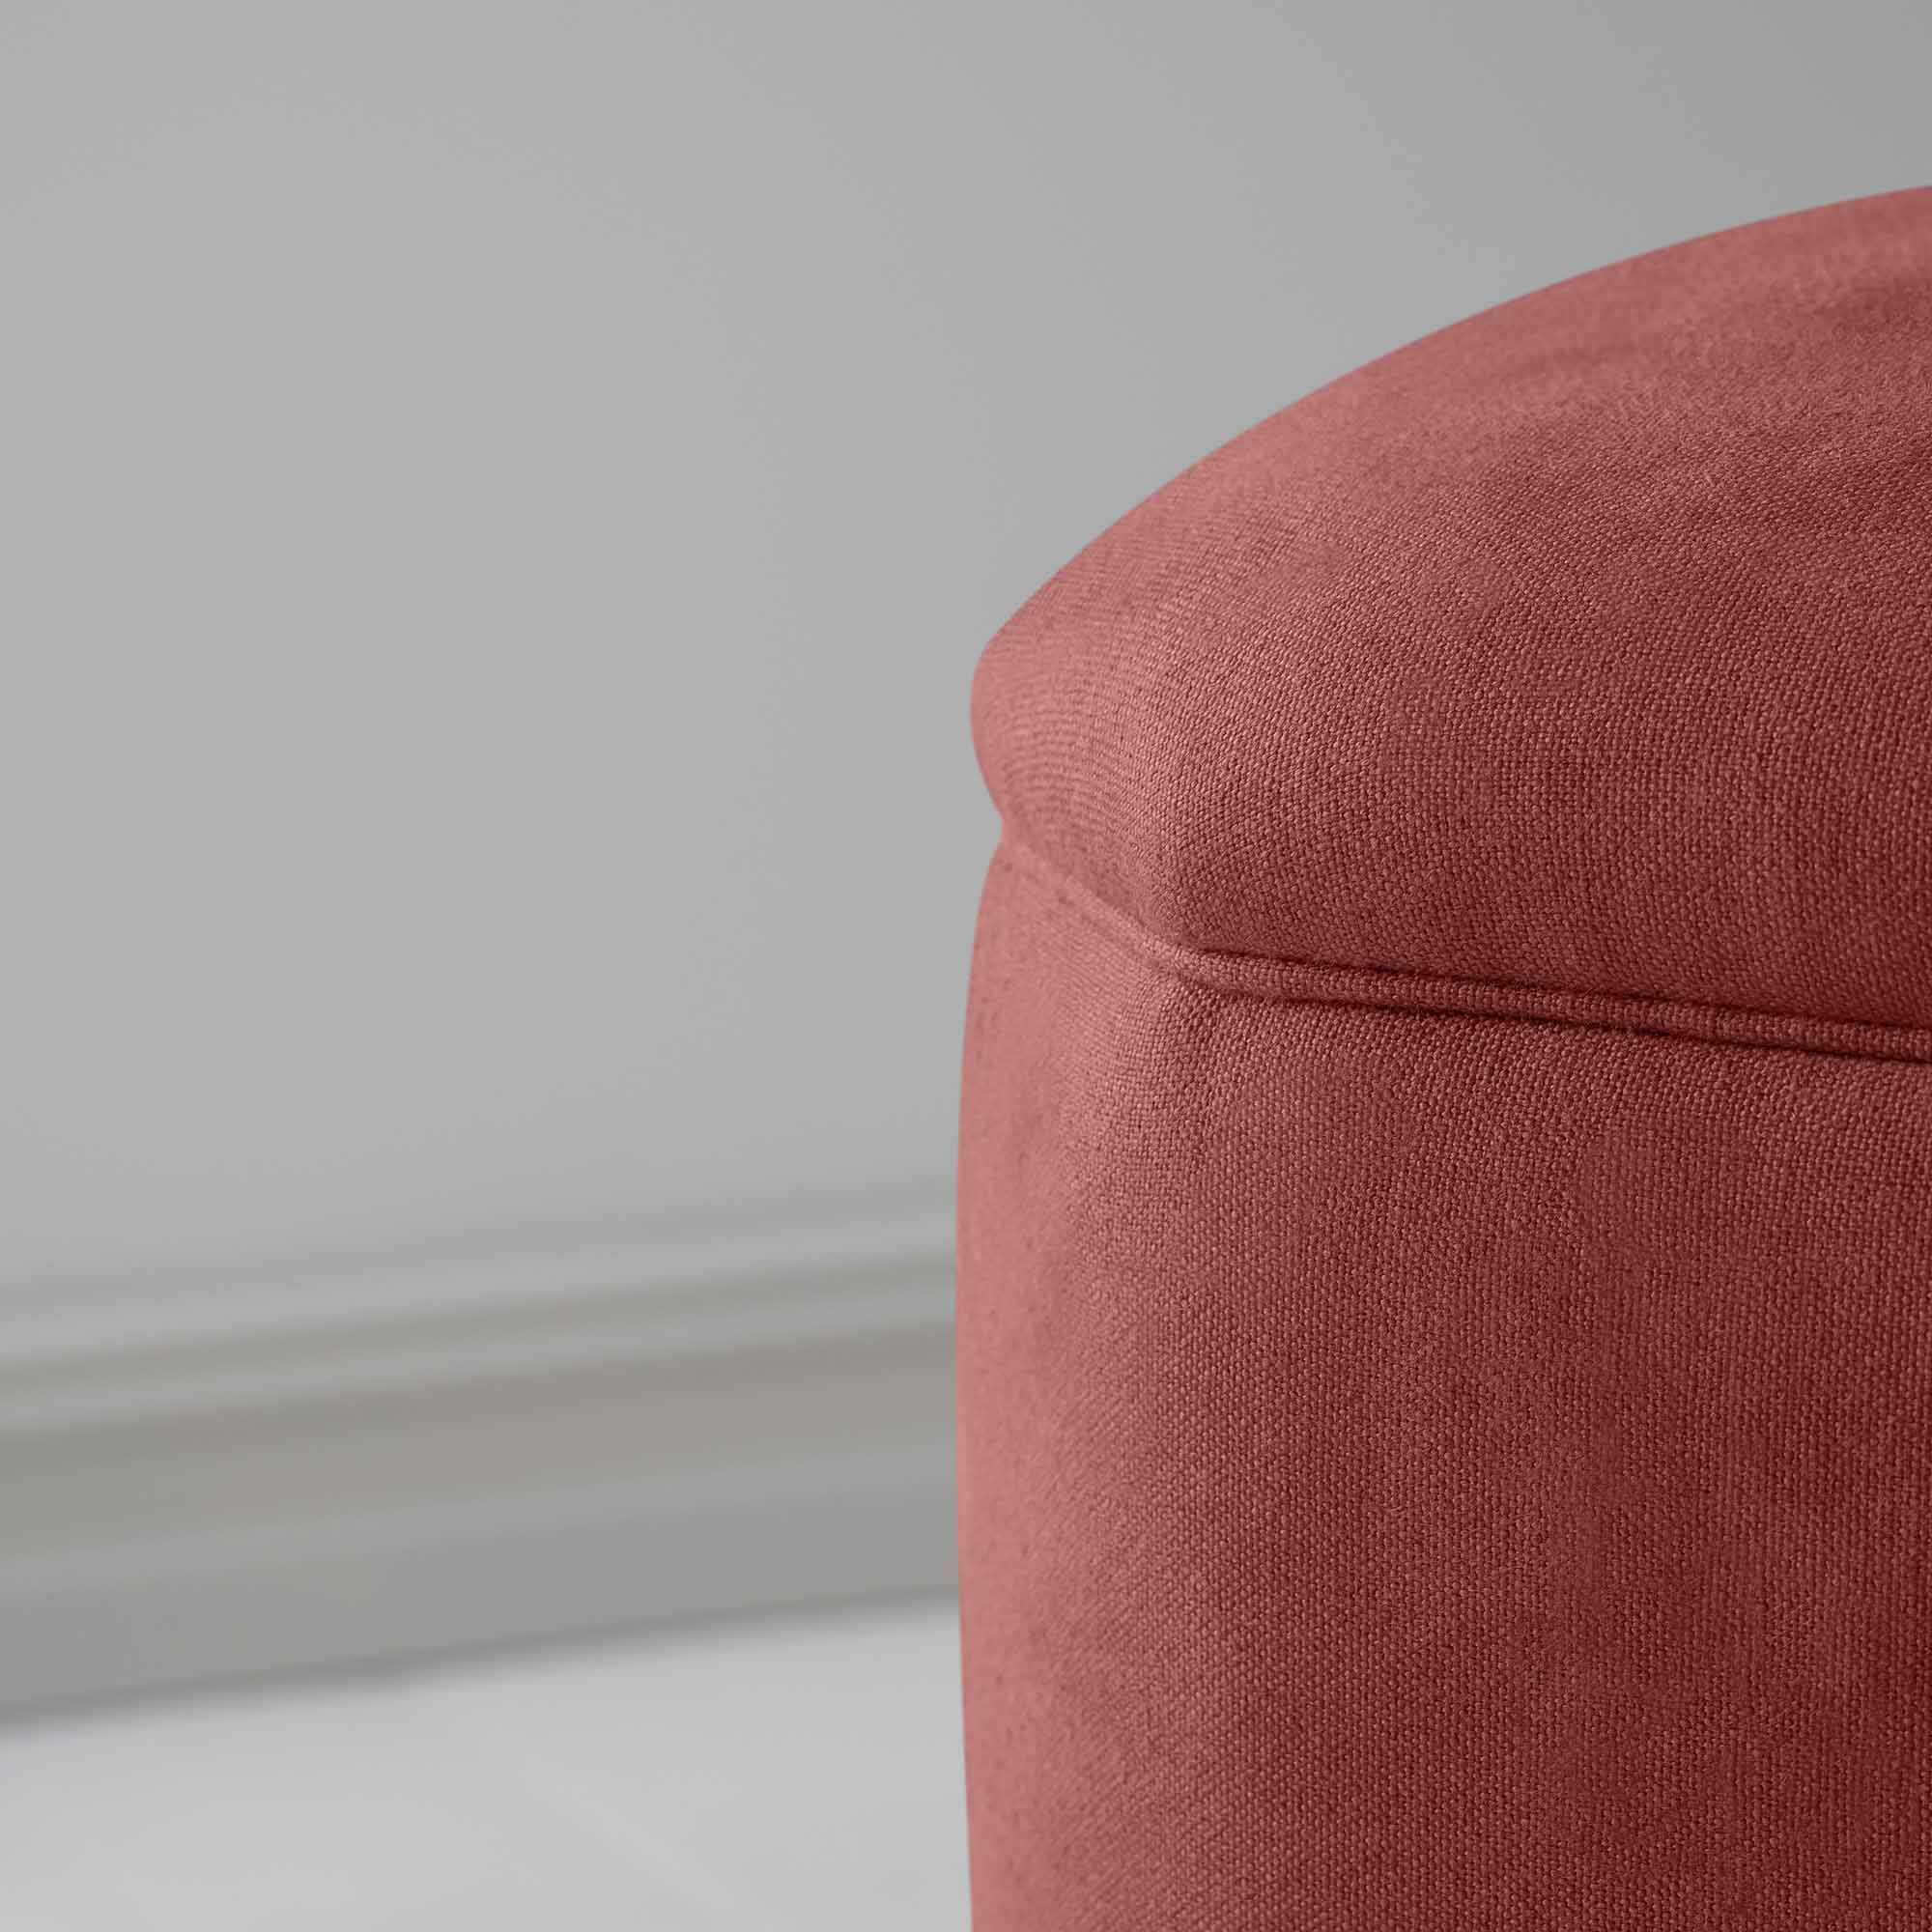  Thither Hexagonal Ottoman in Laidback Linen Rouge 